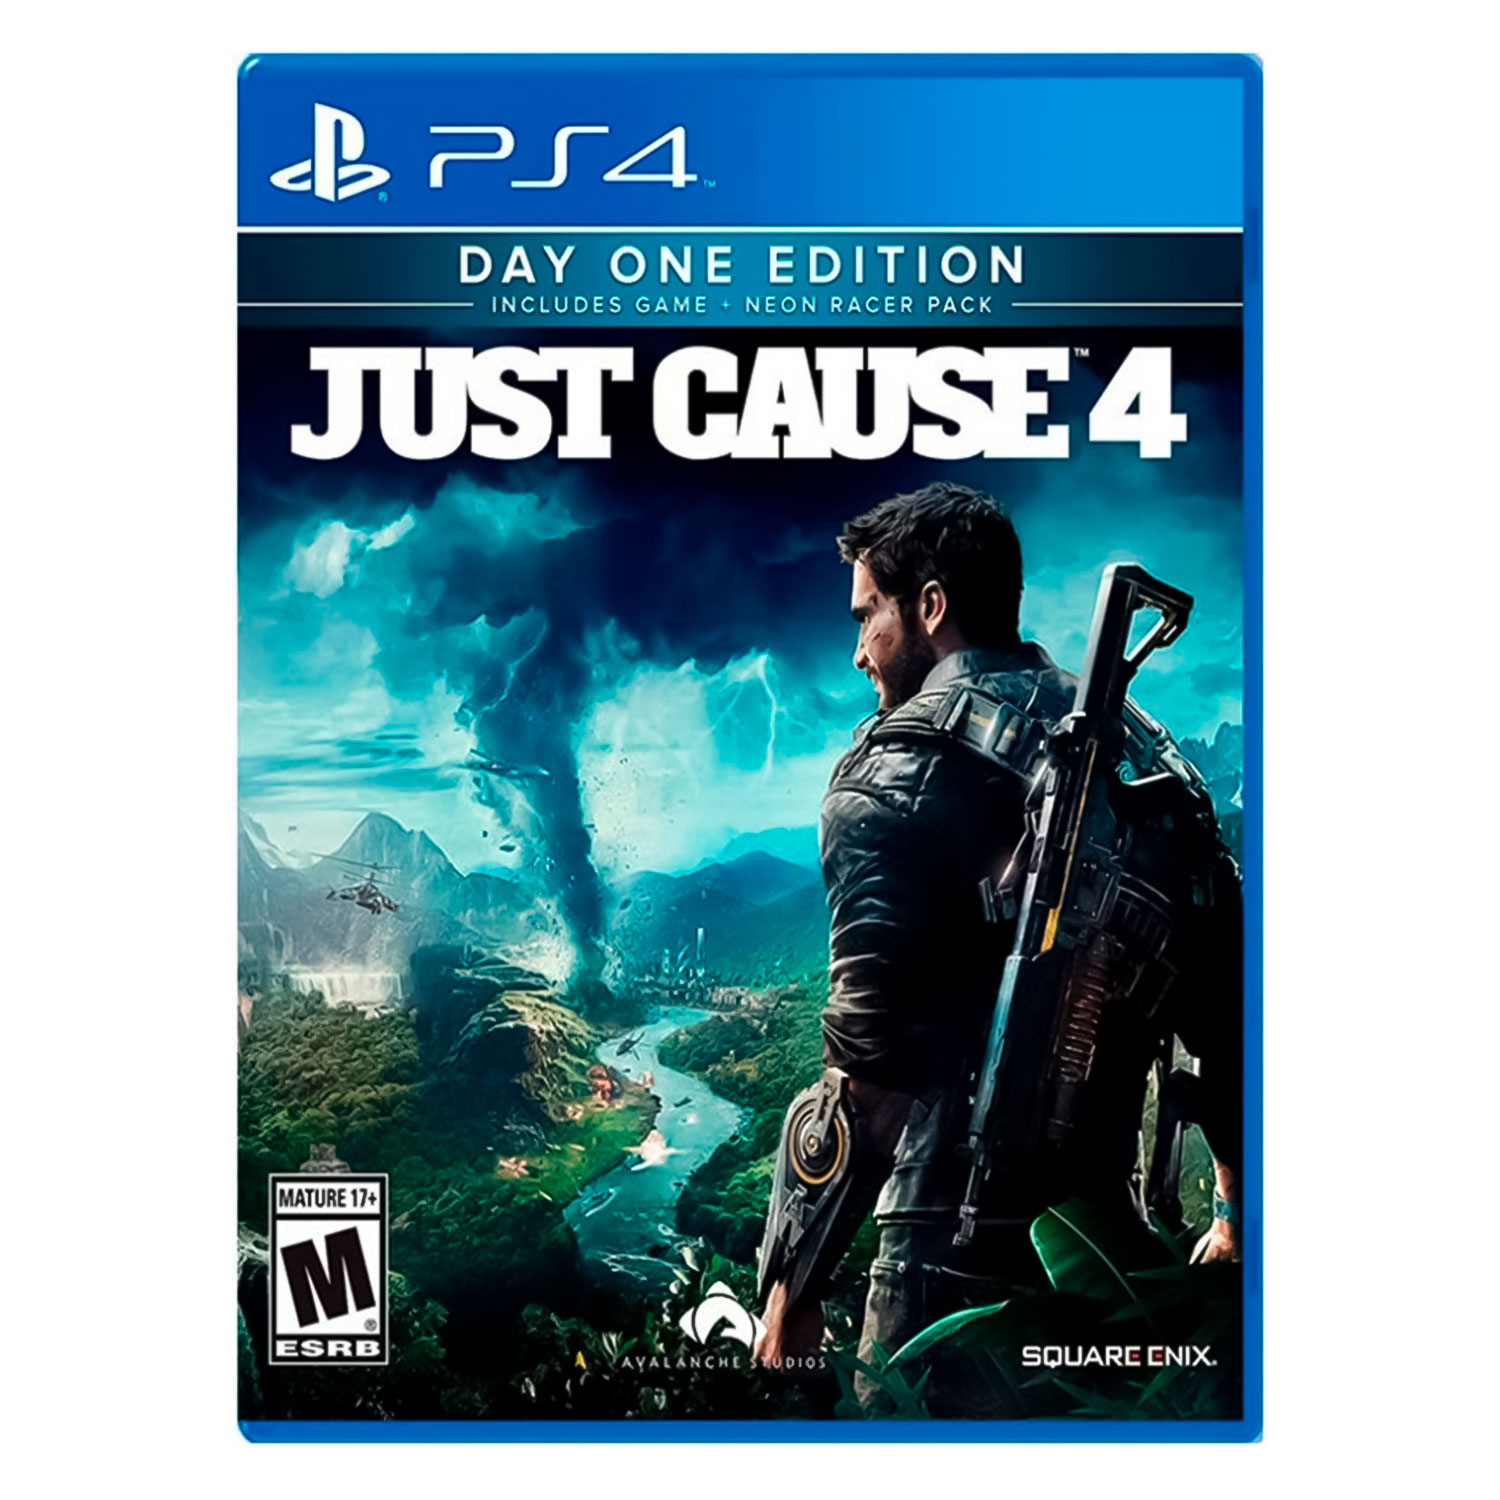 Jogo Just Cause 4 Day One Edition para PS4